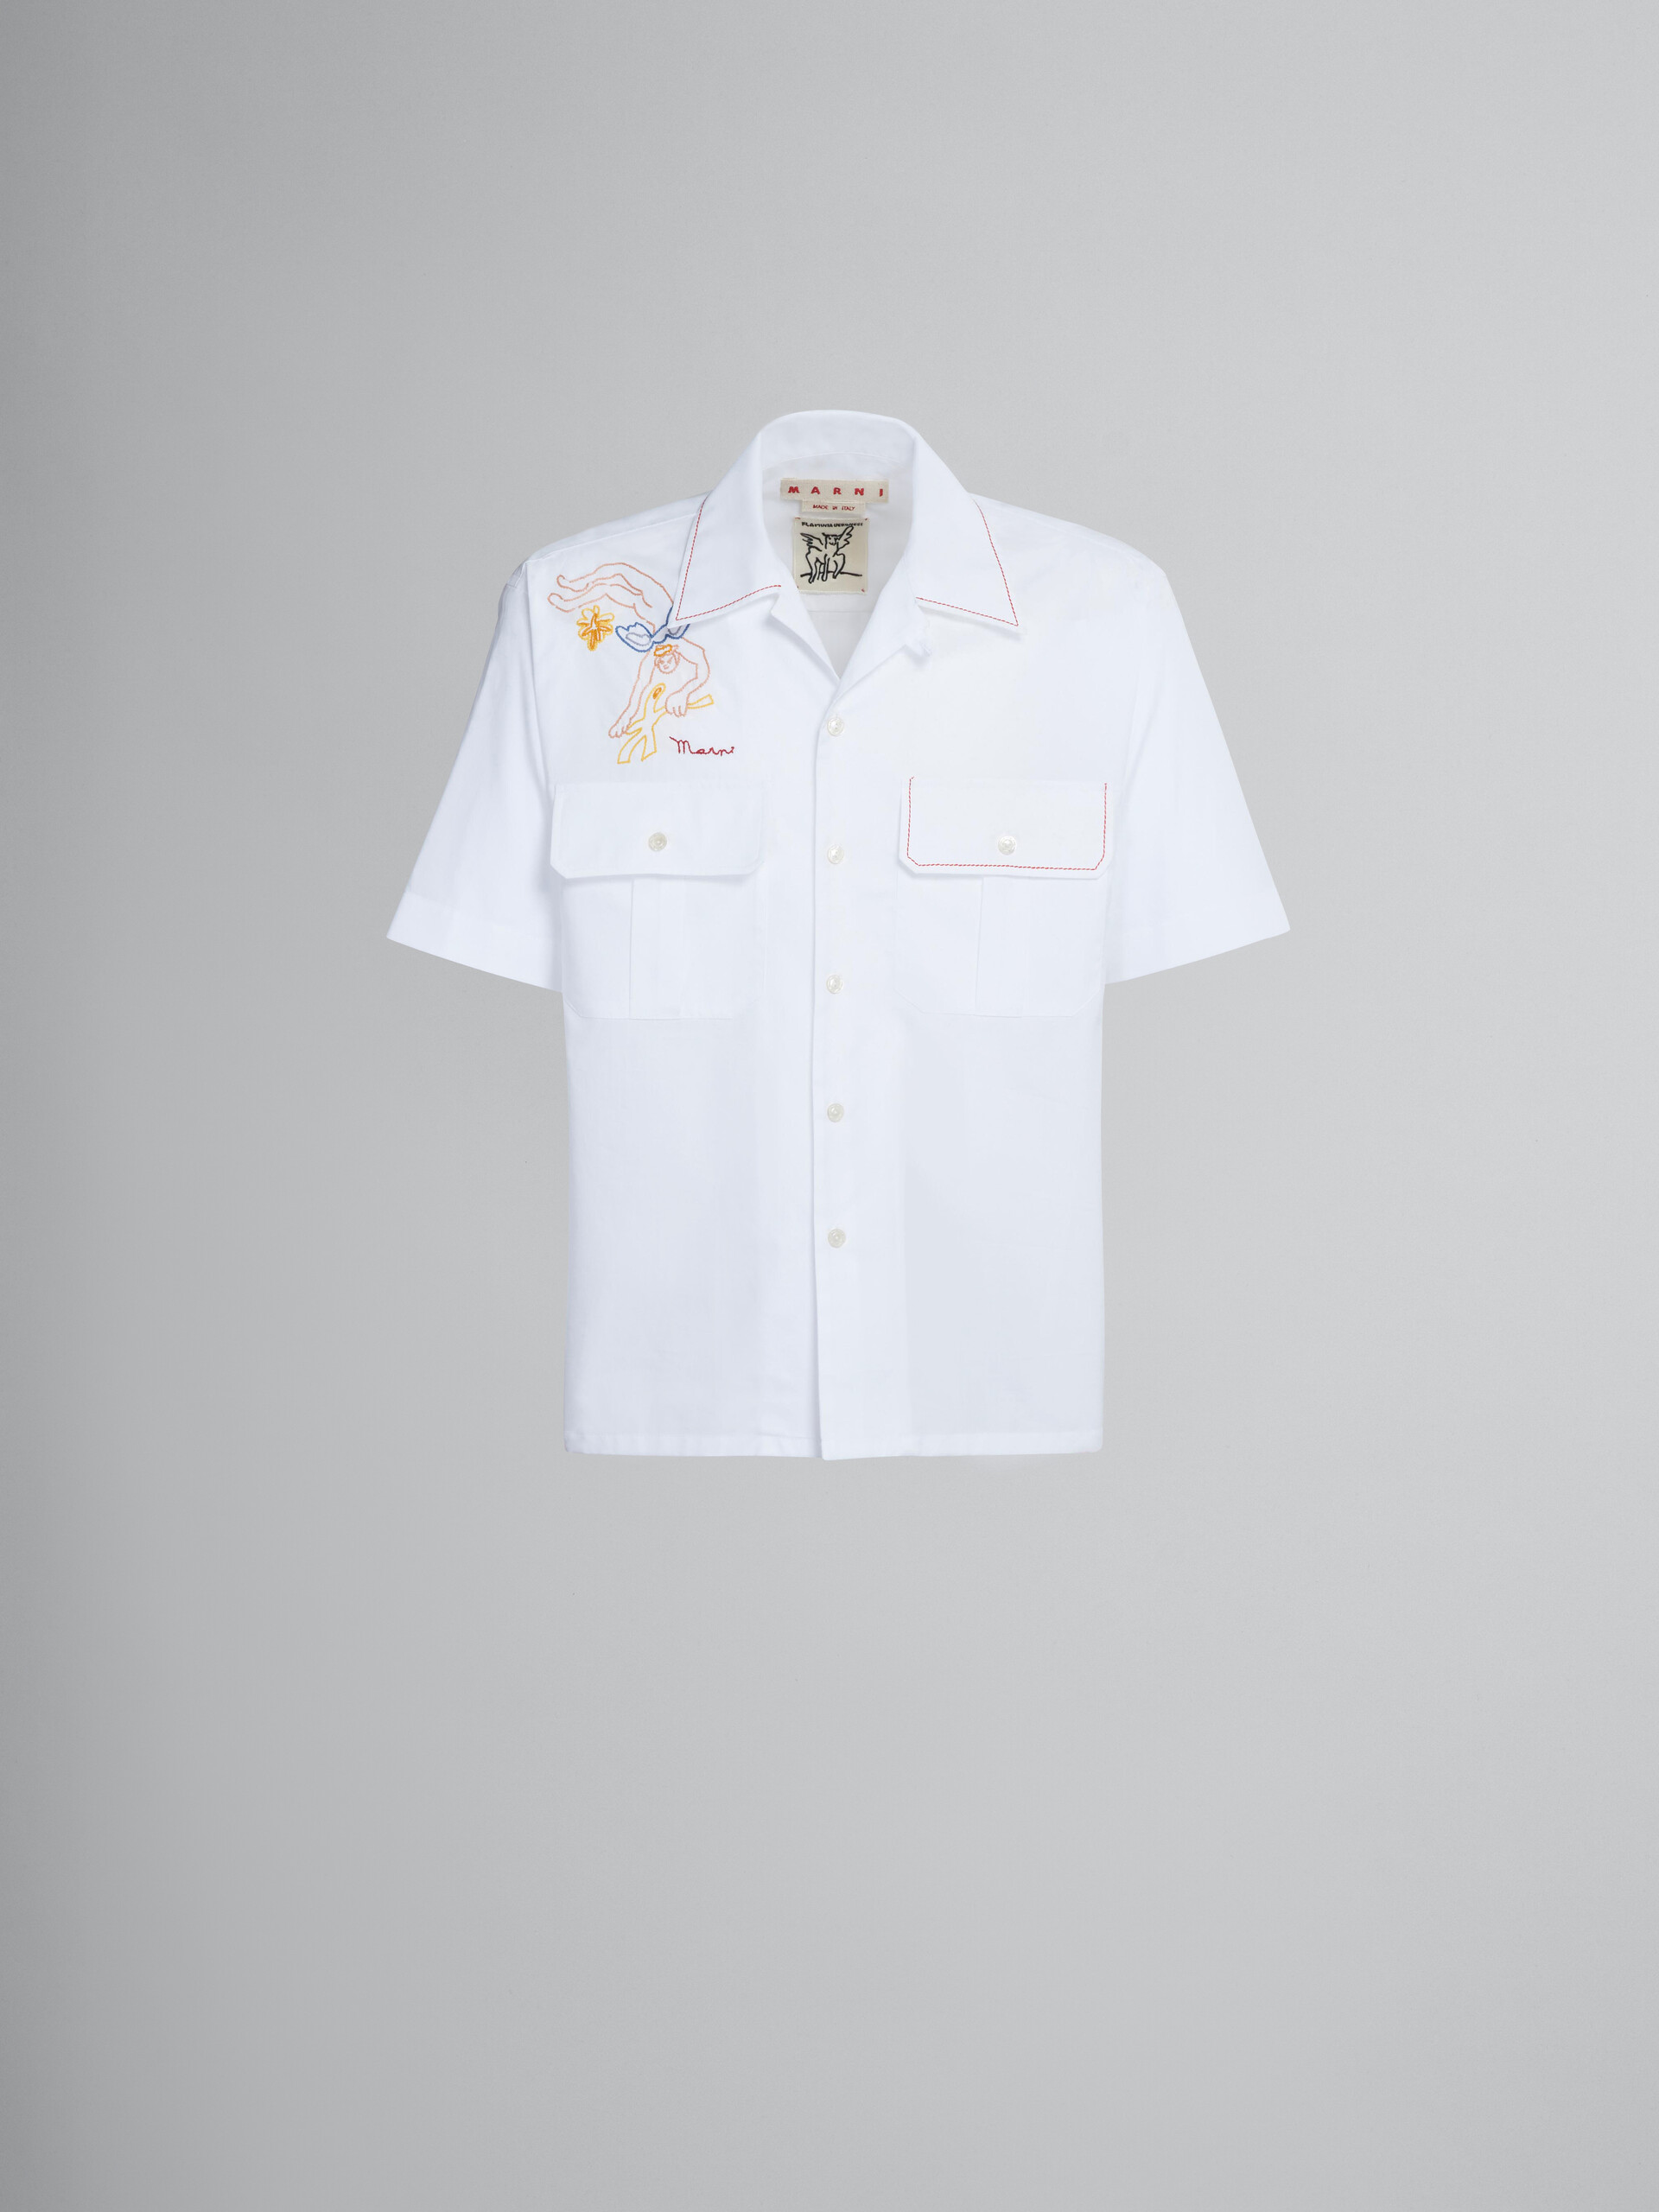 White poplin shirt with embroidery - Shirts - Image 1